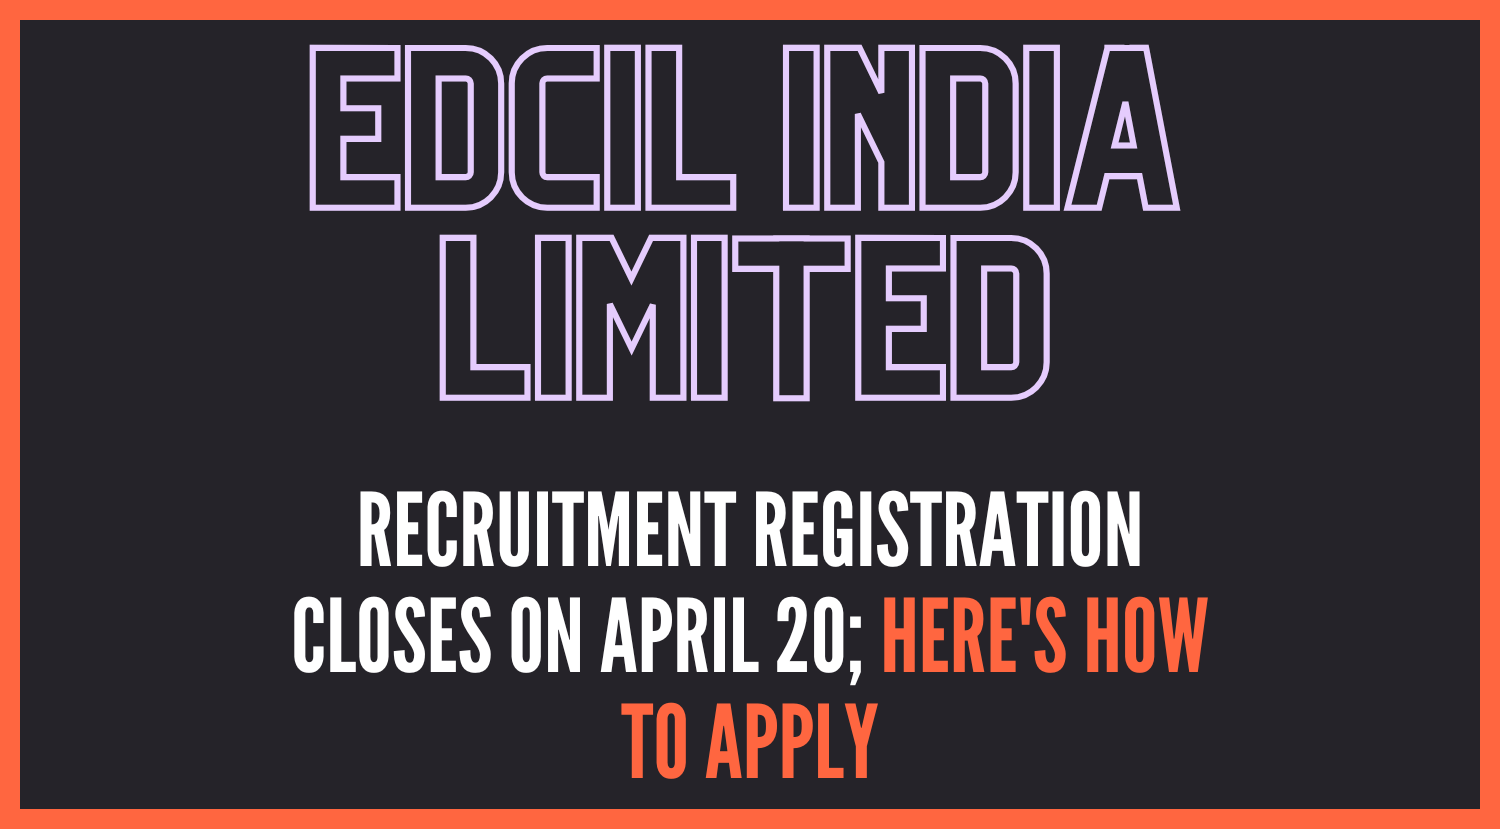 EdCIL India Limited Recruitment registration closes on April 20 heres how to apply